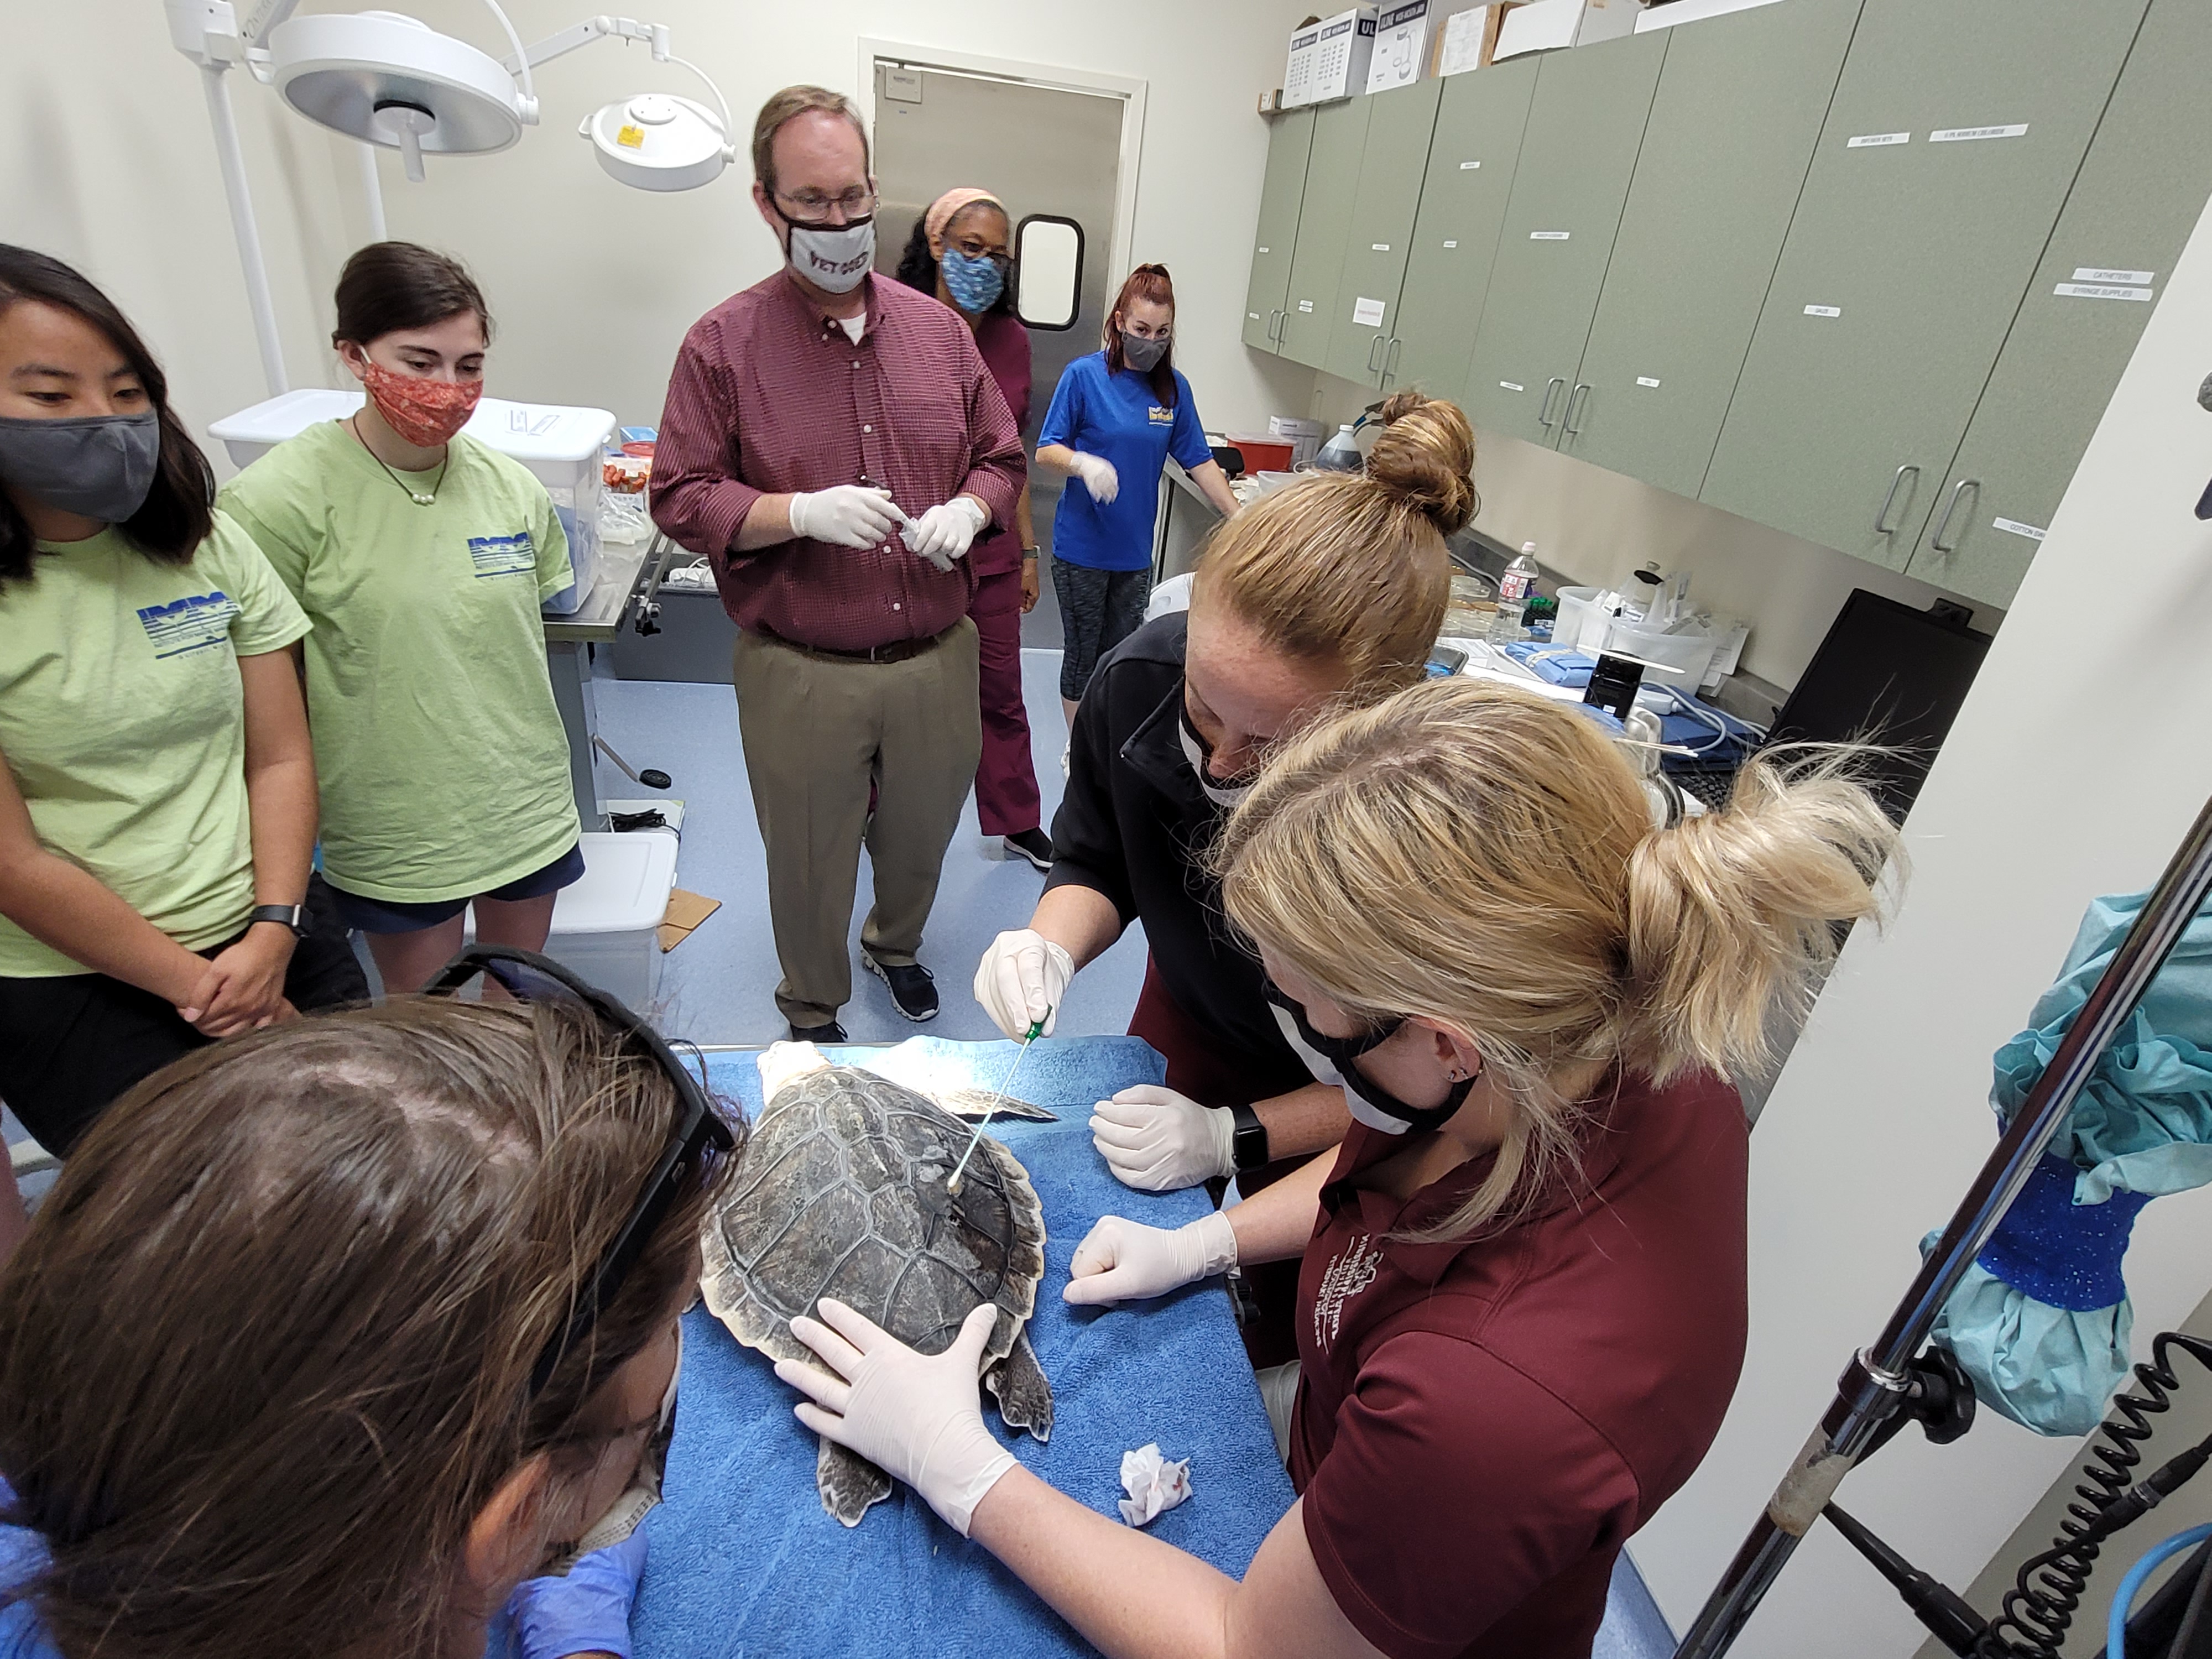 Students and veterinarians perform an exam on a sea turtle